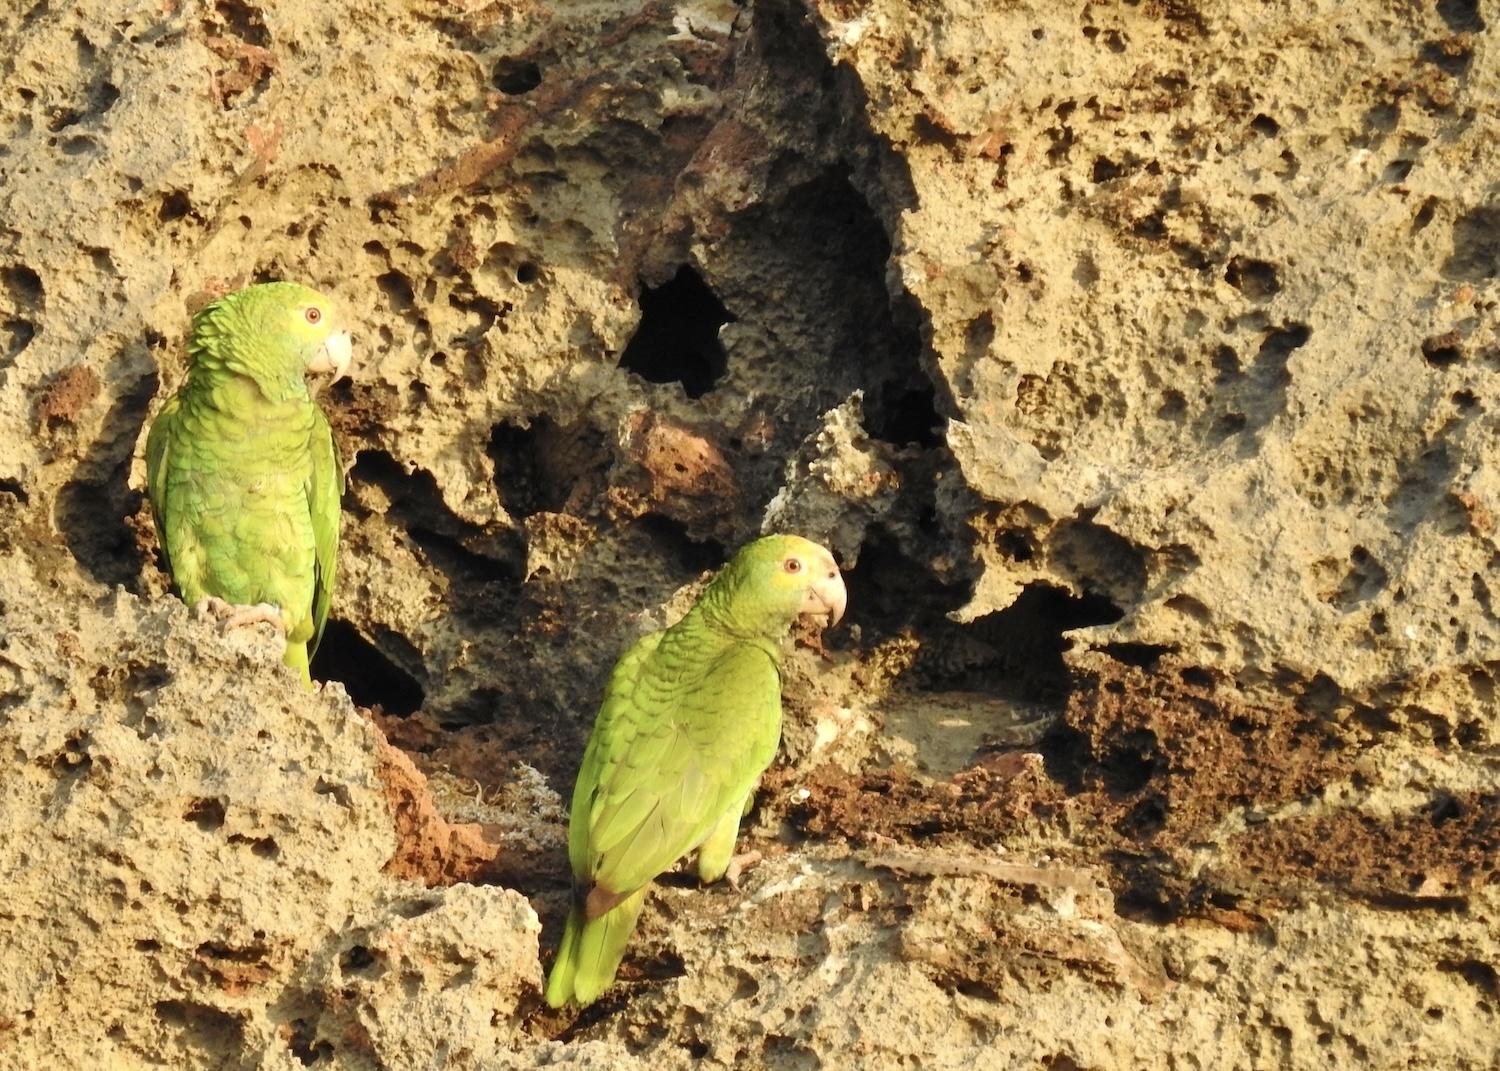 This mated pair of Loras seems to be scouting nesting areas in the volcanic rocks at Arikok National Park.